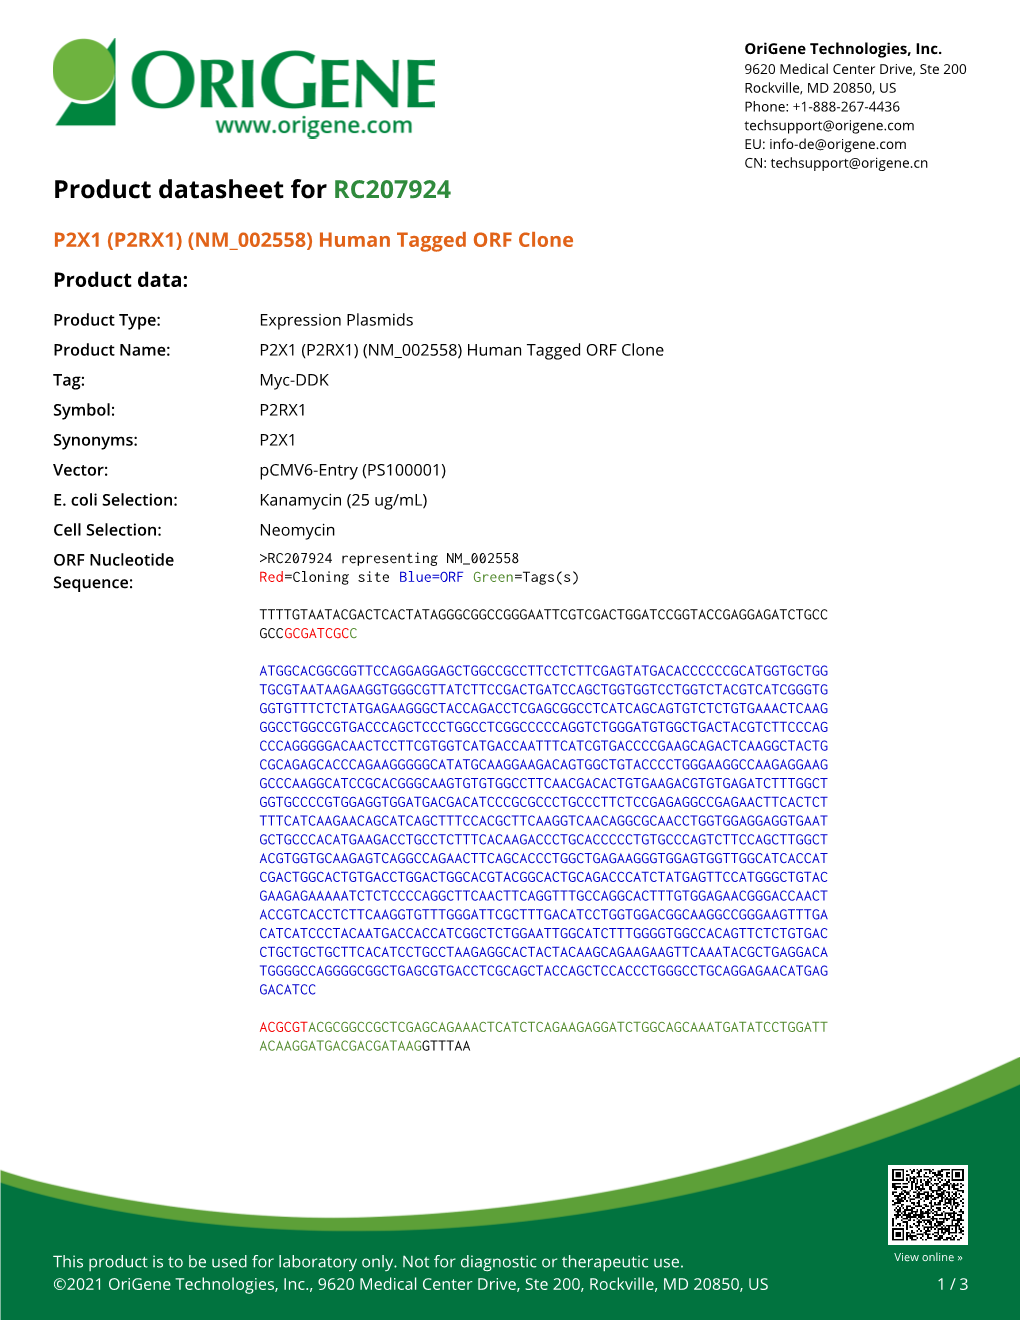 P2X1 (P2RX1) (NM 002558) Human Tagged ORF Clone Product Data